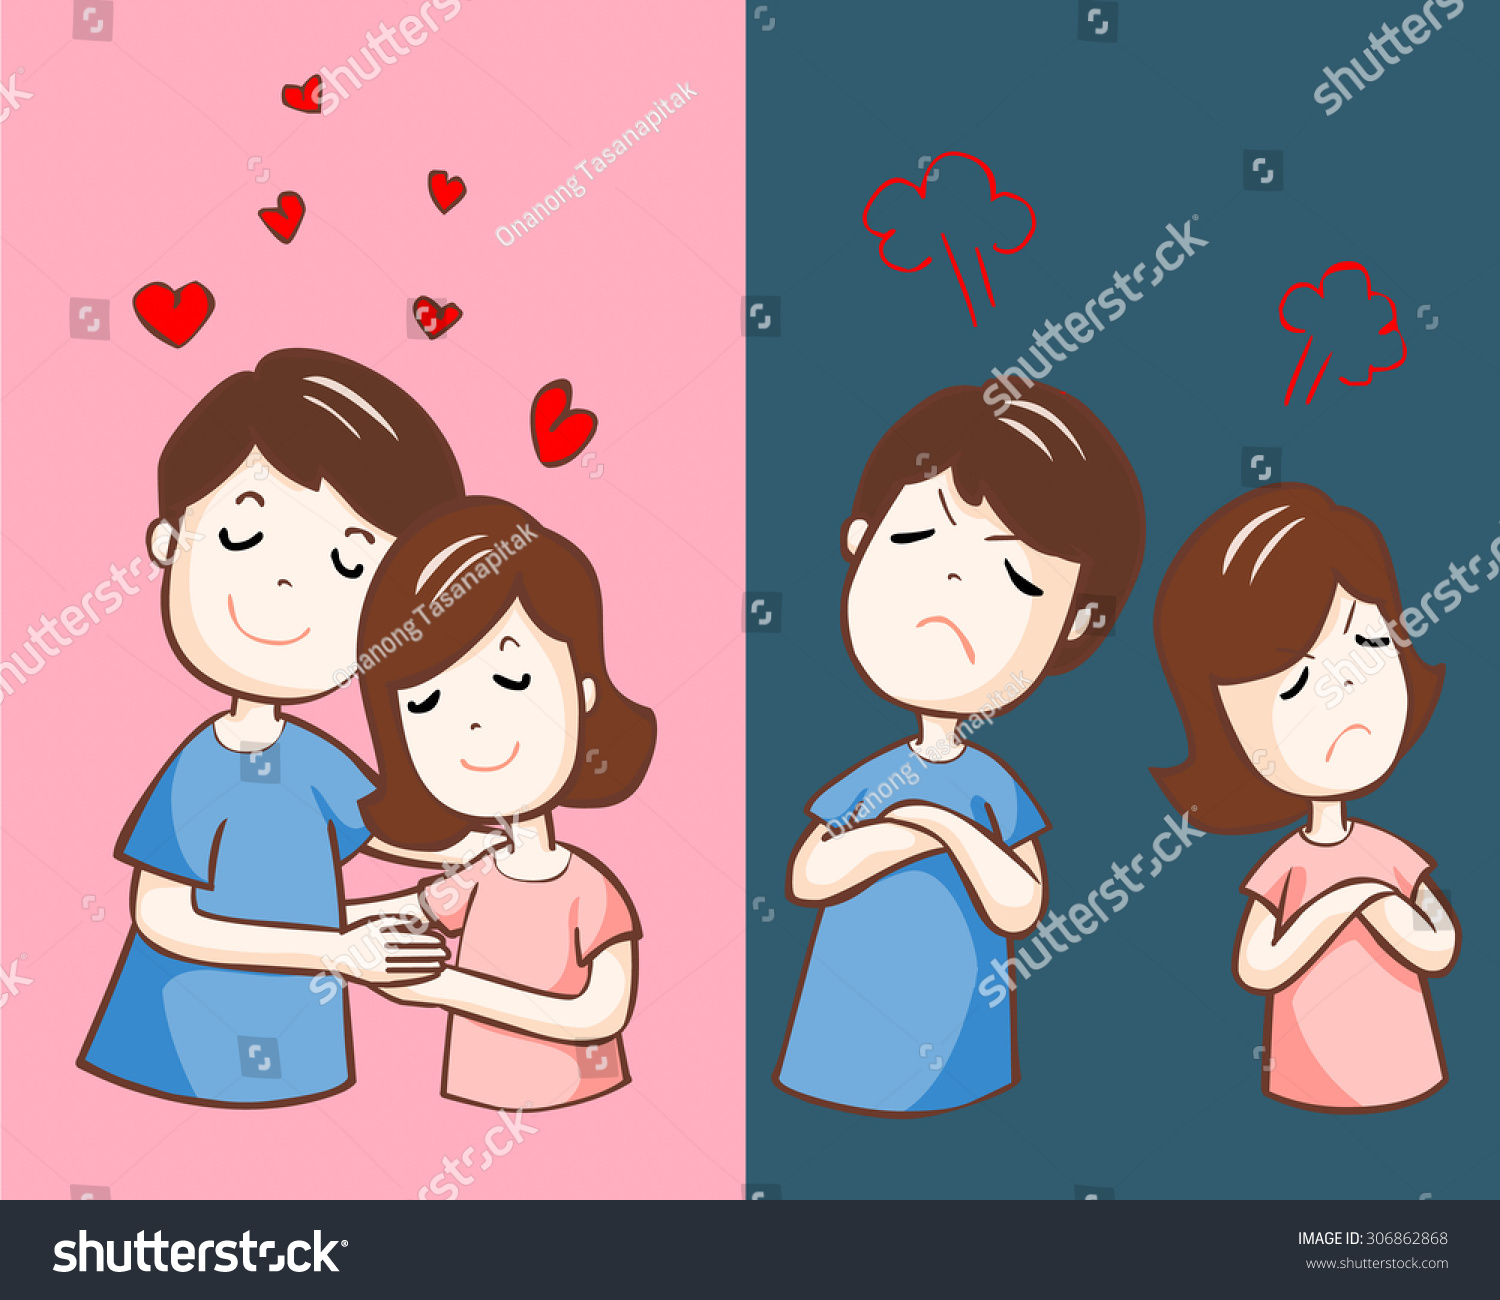 Lover Hate Love Each Other Vector Stock Vector 306862868 ...